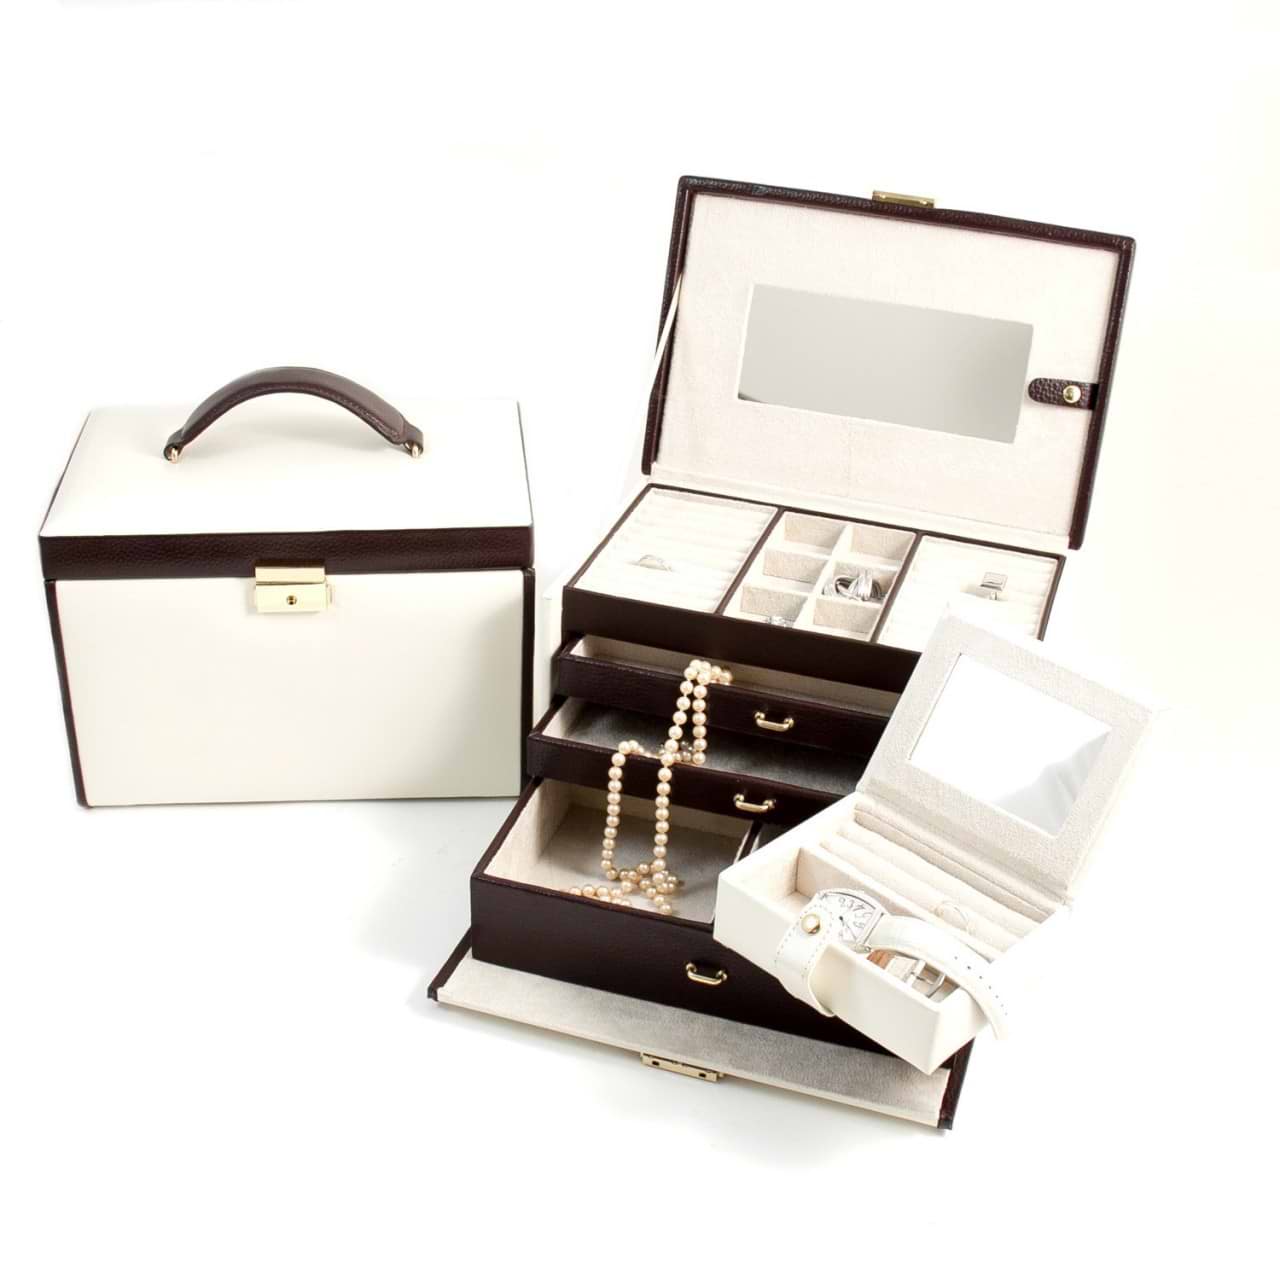 Ivory & Brown Leather 4 Level Jewelry Box w/ 3 Drawers & Travel Case